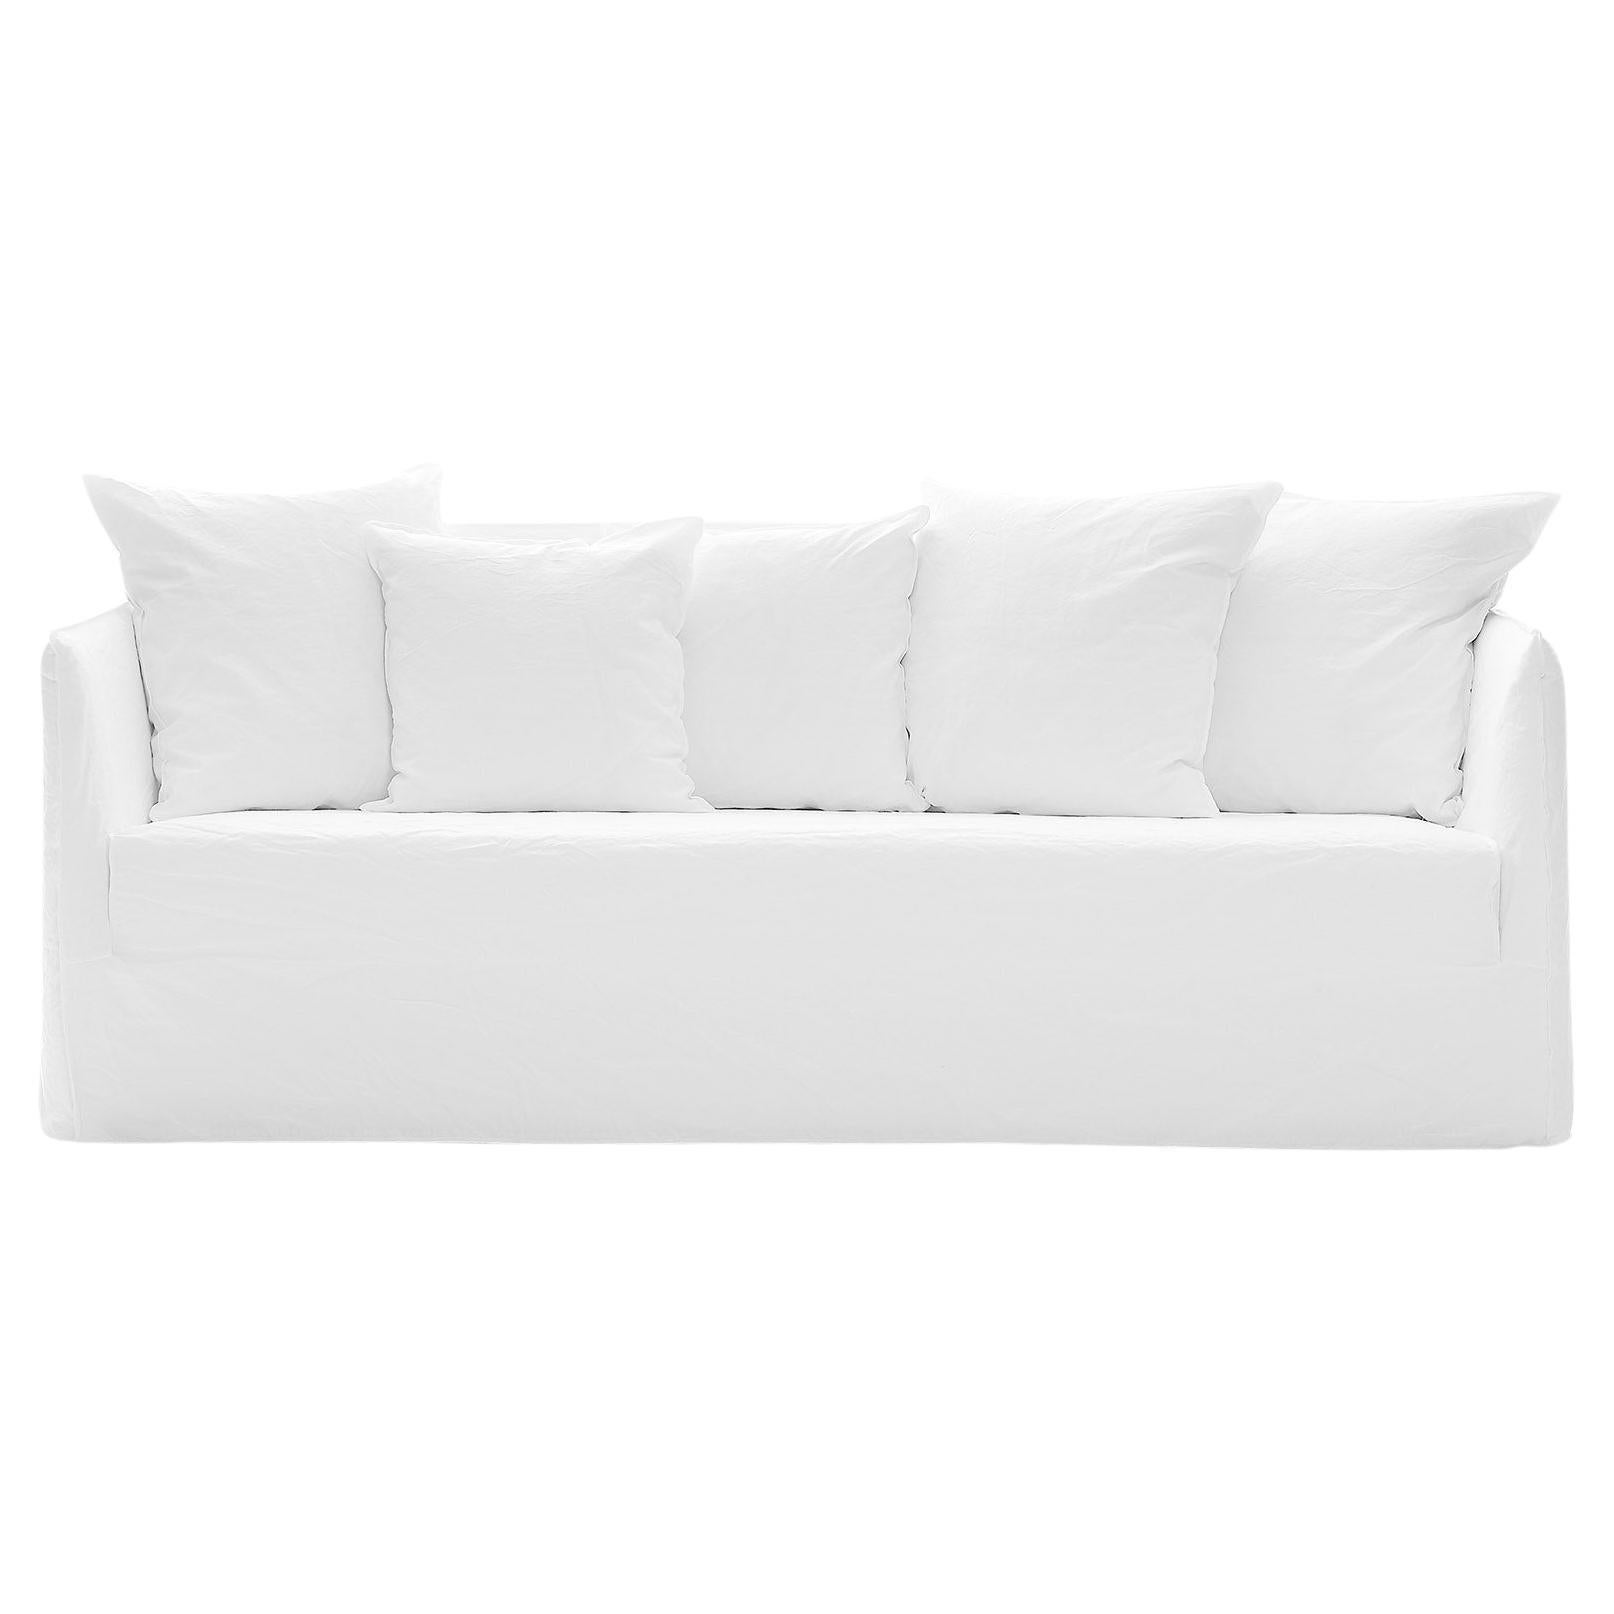 Gervasoni Ghost 10 G Sofa in White Linen Upholstery by Paola Navone For Sale